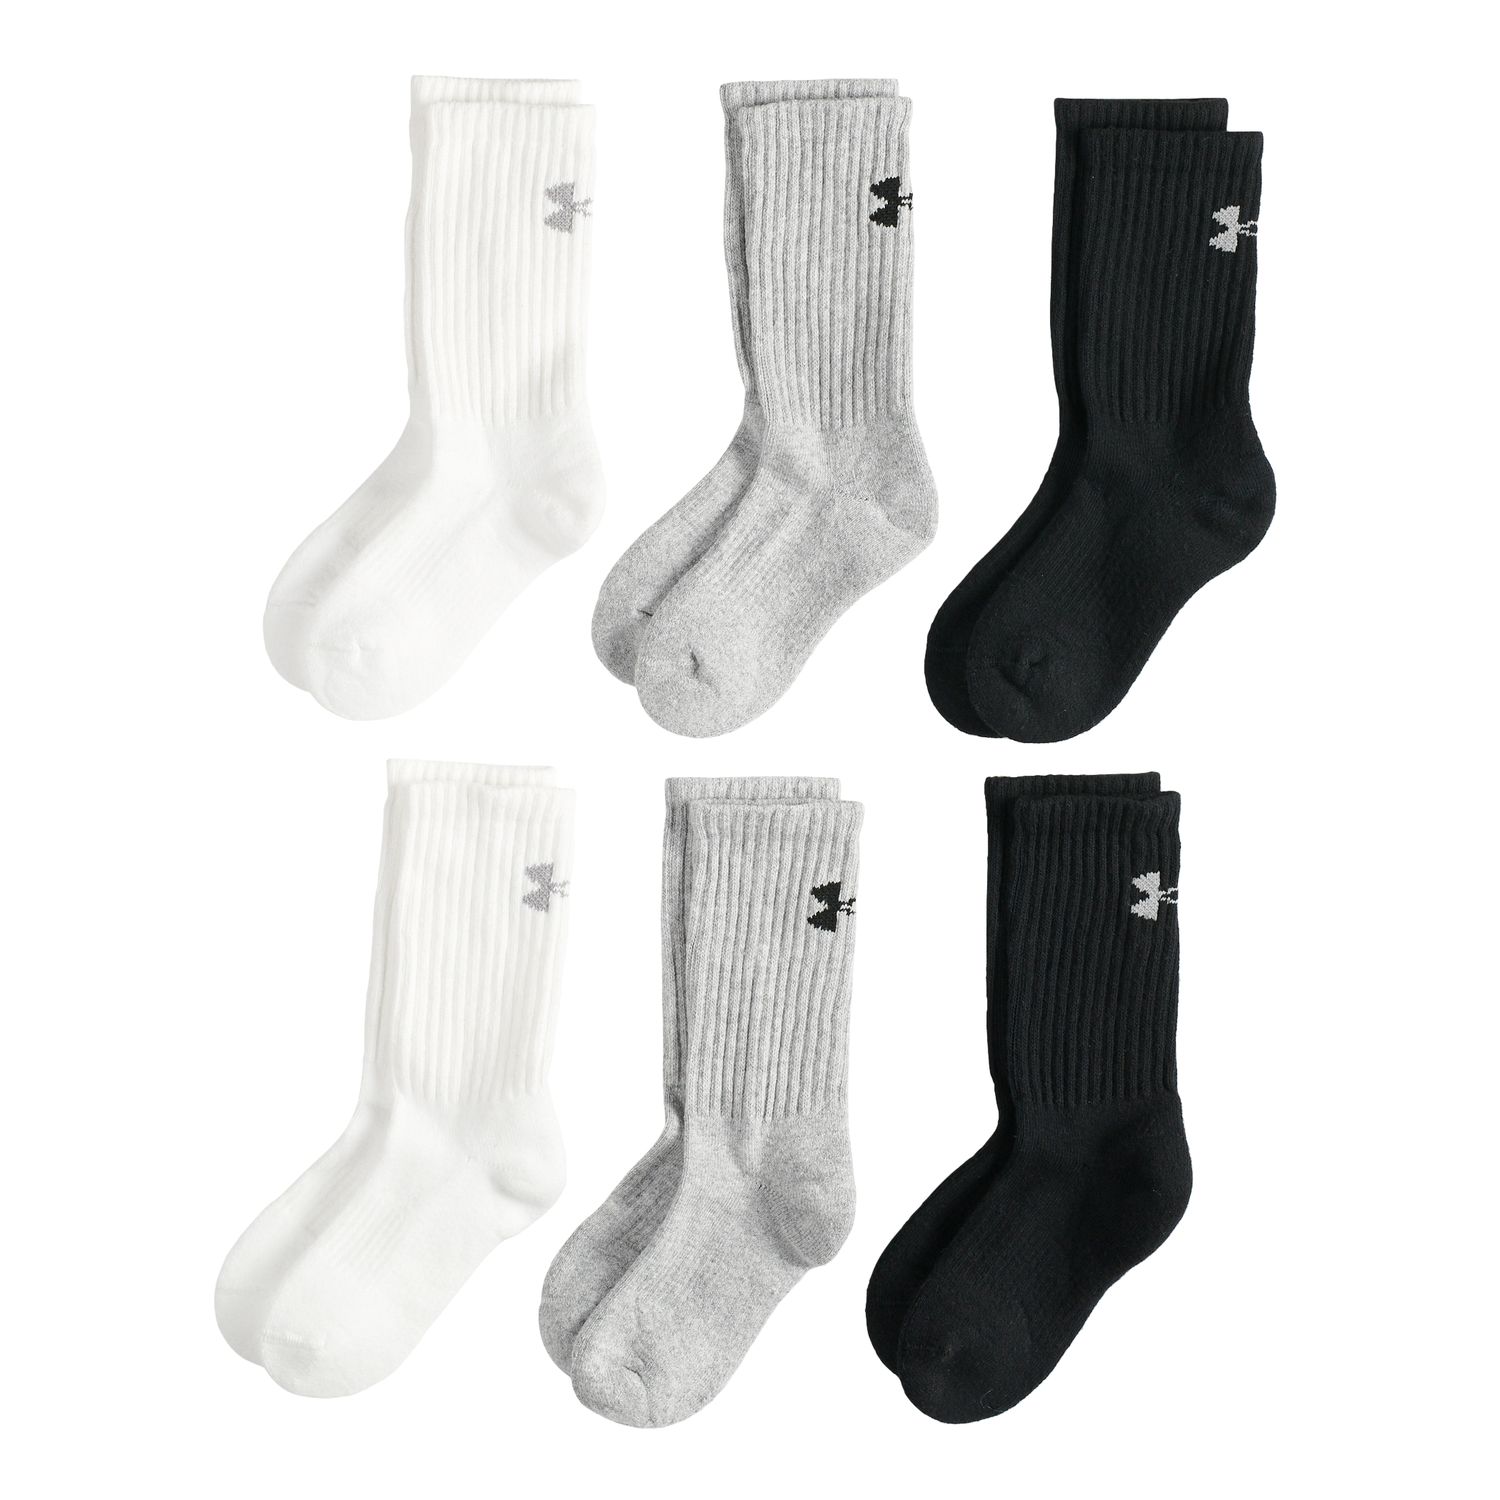 6-Pack Charged Cotton Crew Socks